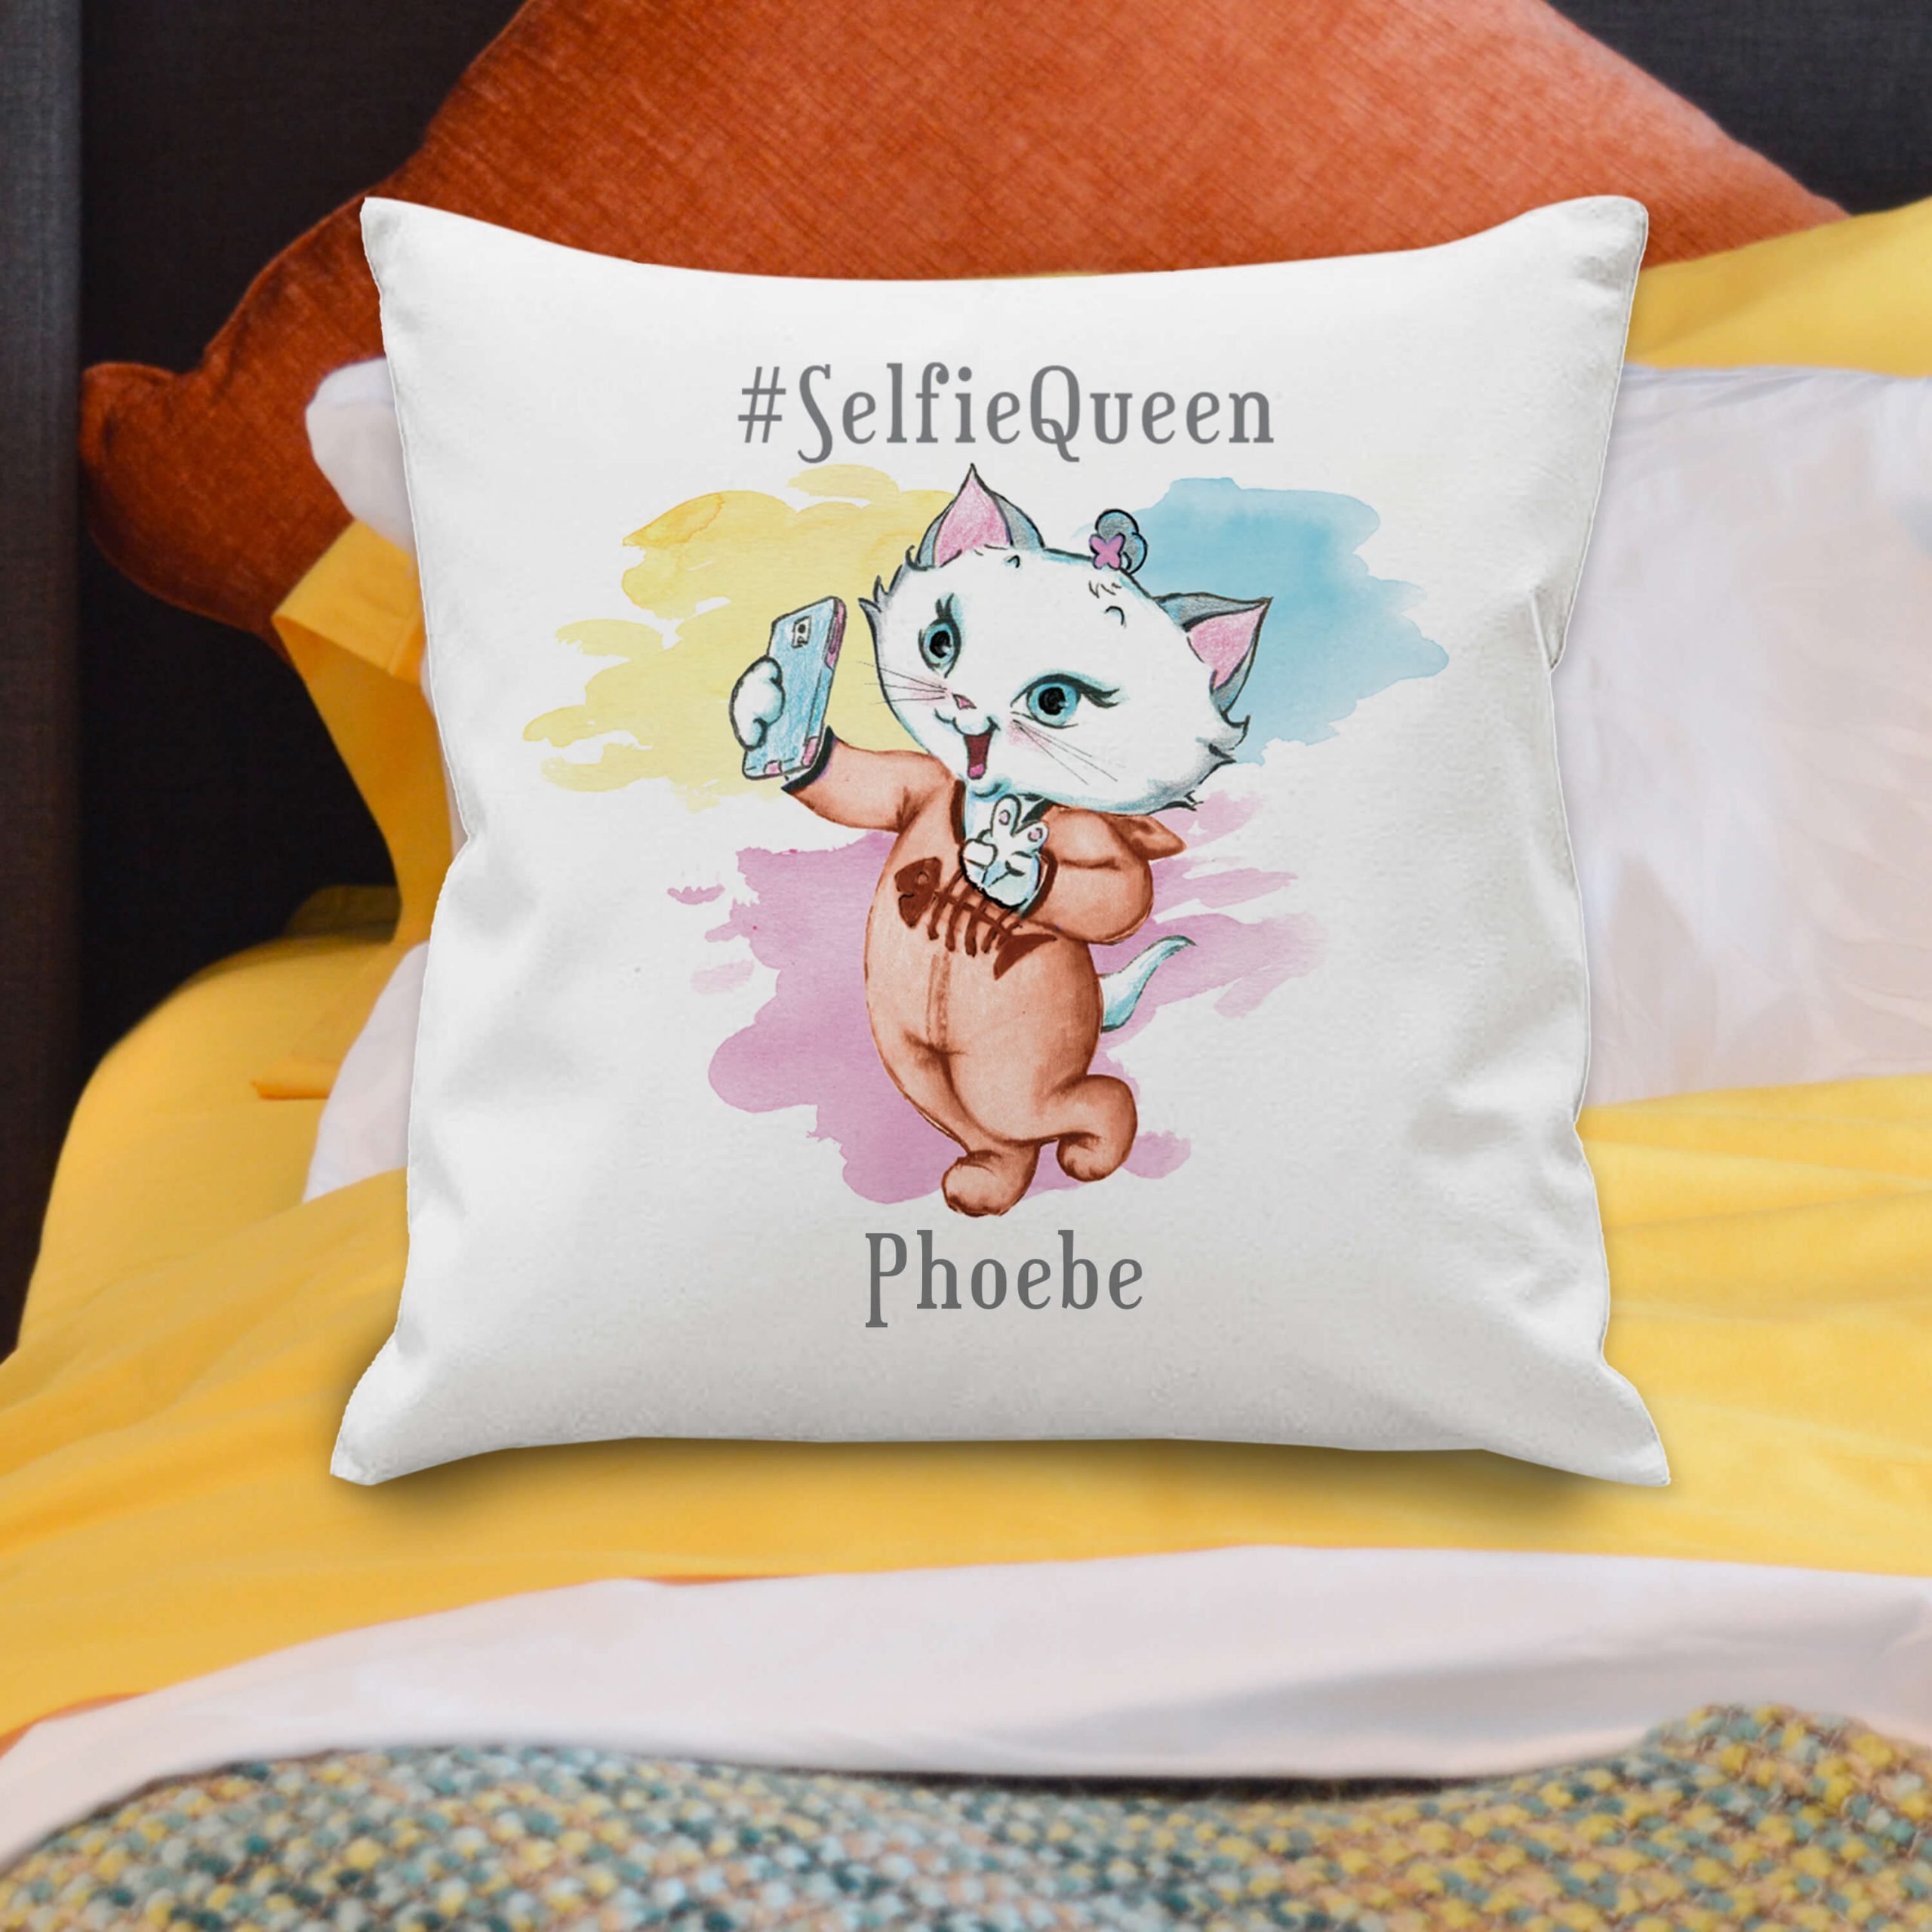 Personalised Nina Selfie Queen Cushion Cover